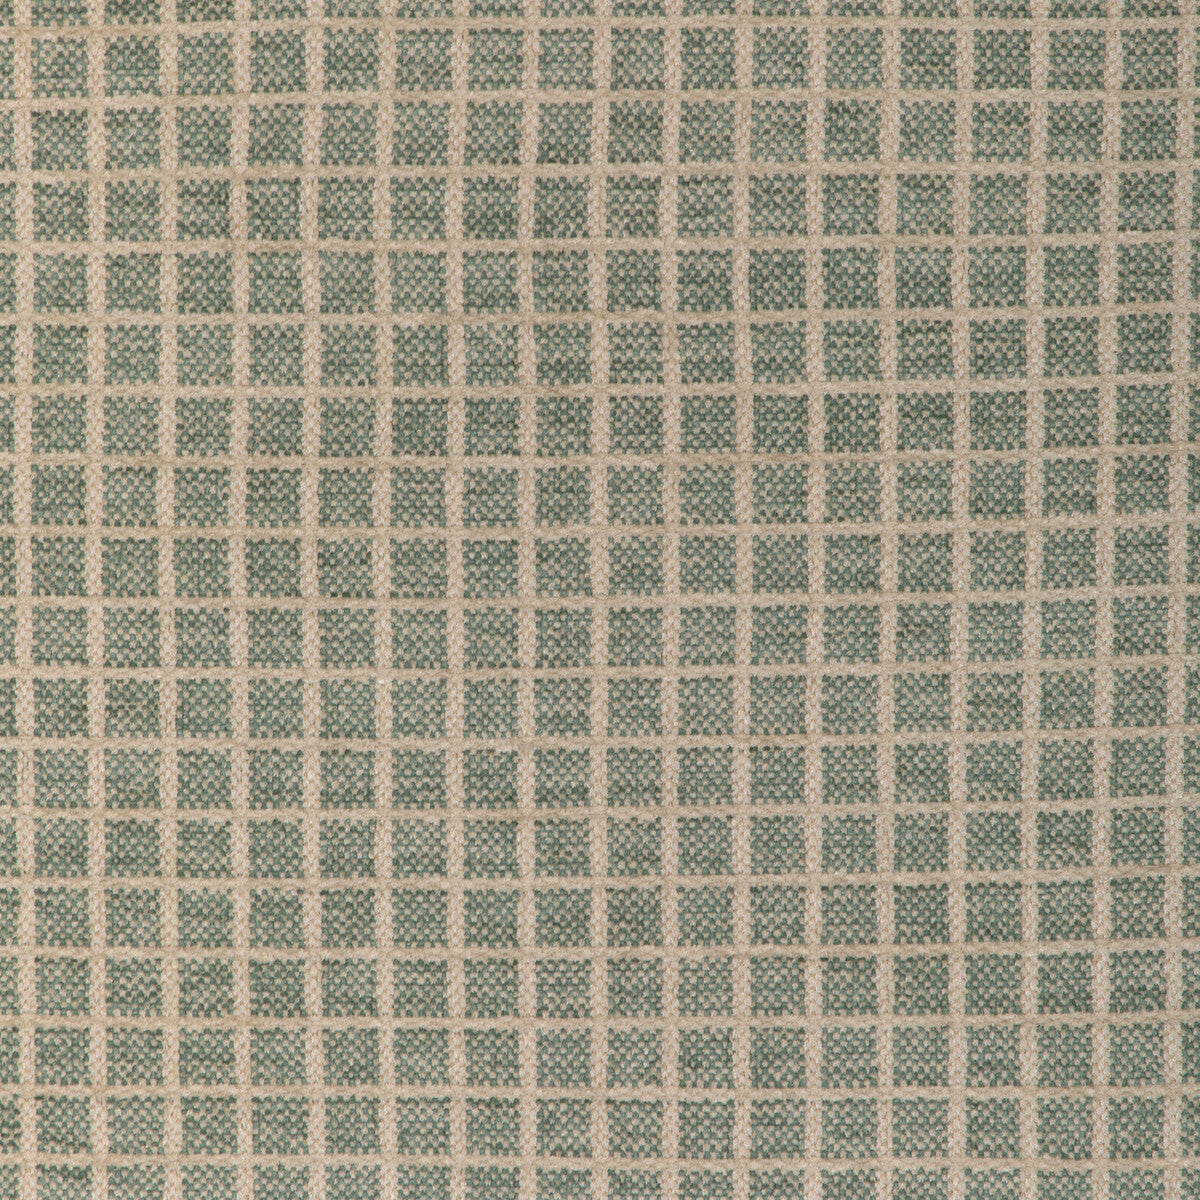 Chiron Texture fabric in lake color - pattern 8023155.13.0 - by Brunschwig &amp; Fils in the Chambery Textures IV collection